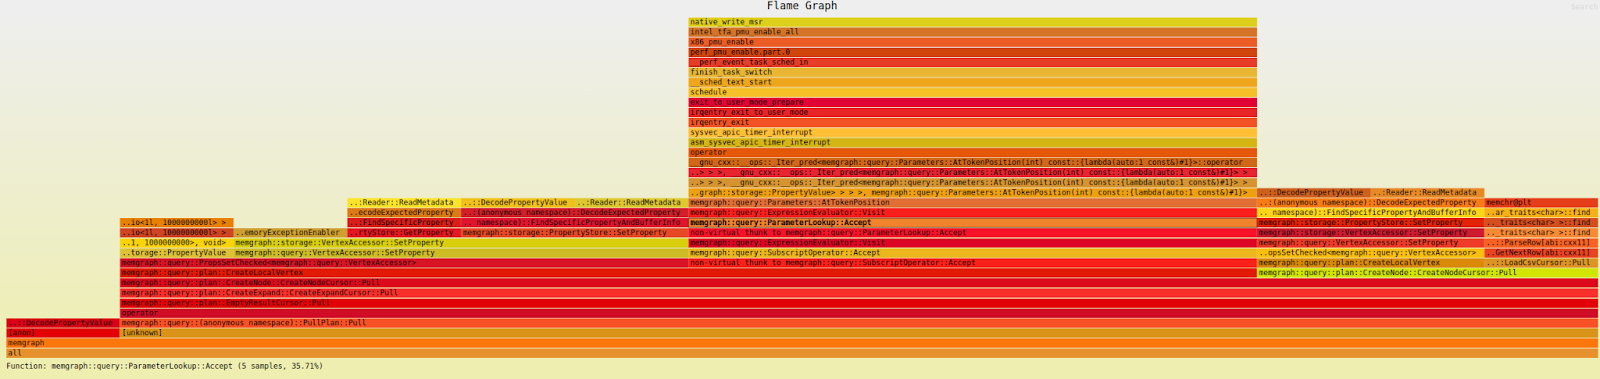 profiling with flamegraph